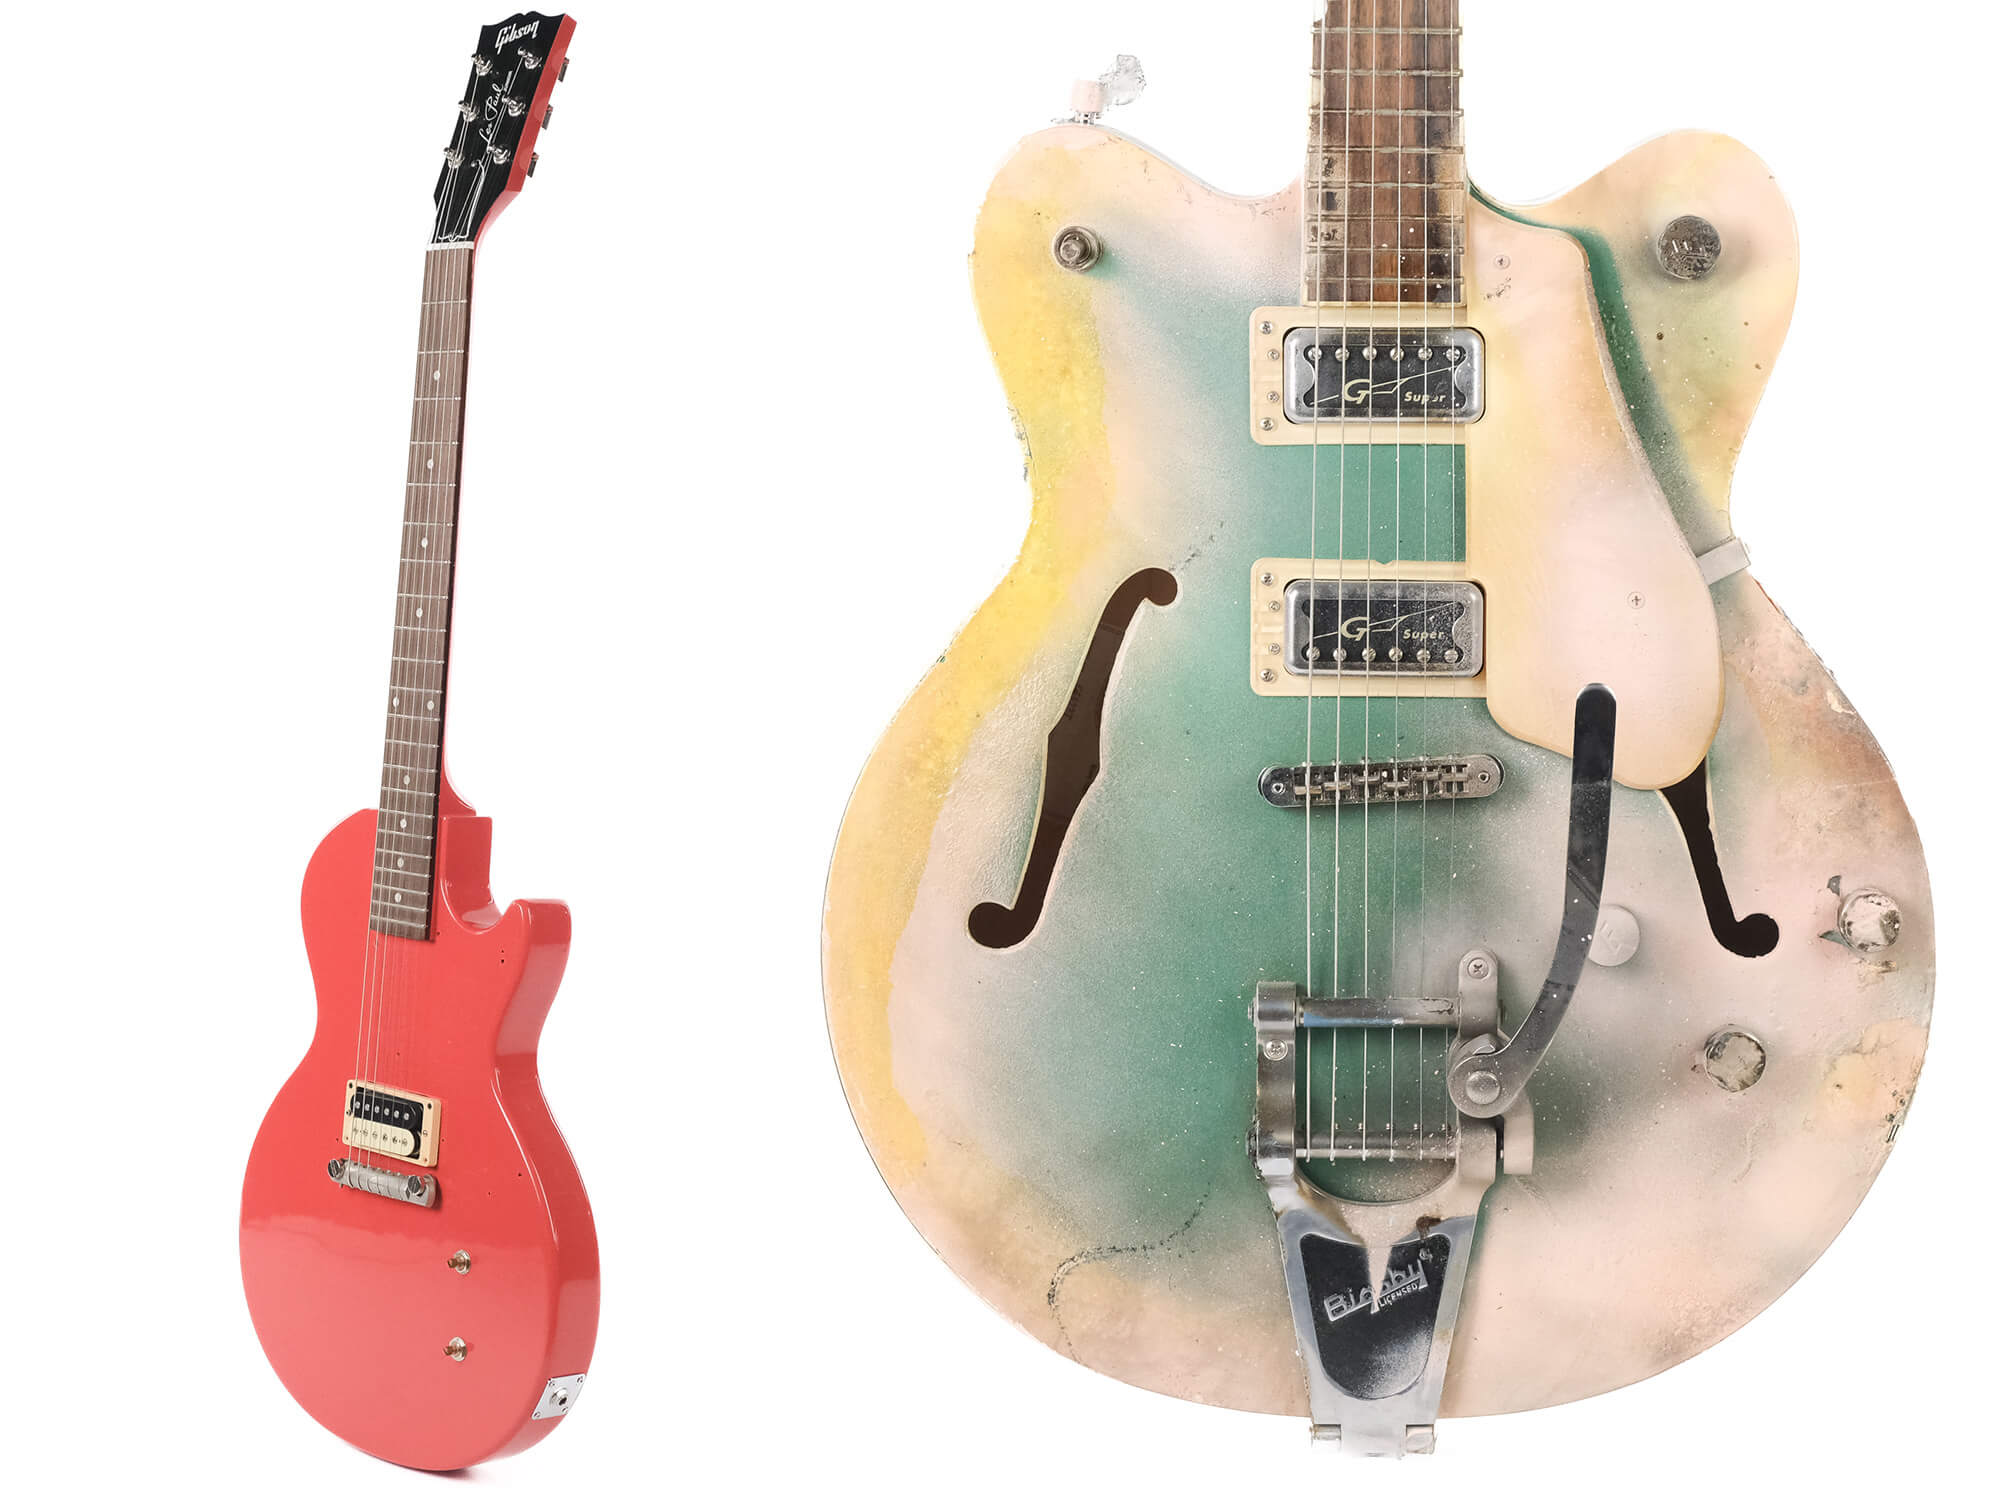 Guitars from the Green Day Reverb shop. On the left is a red Les Paul Jr prototype. On the right is a Gretsch Electromatic